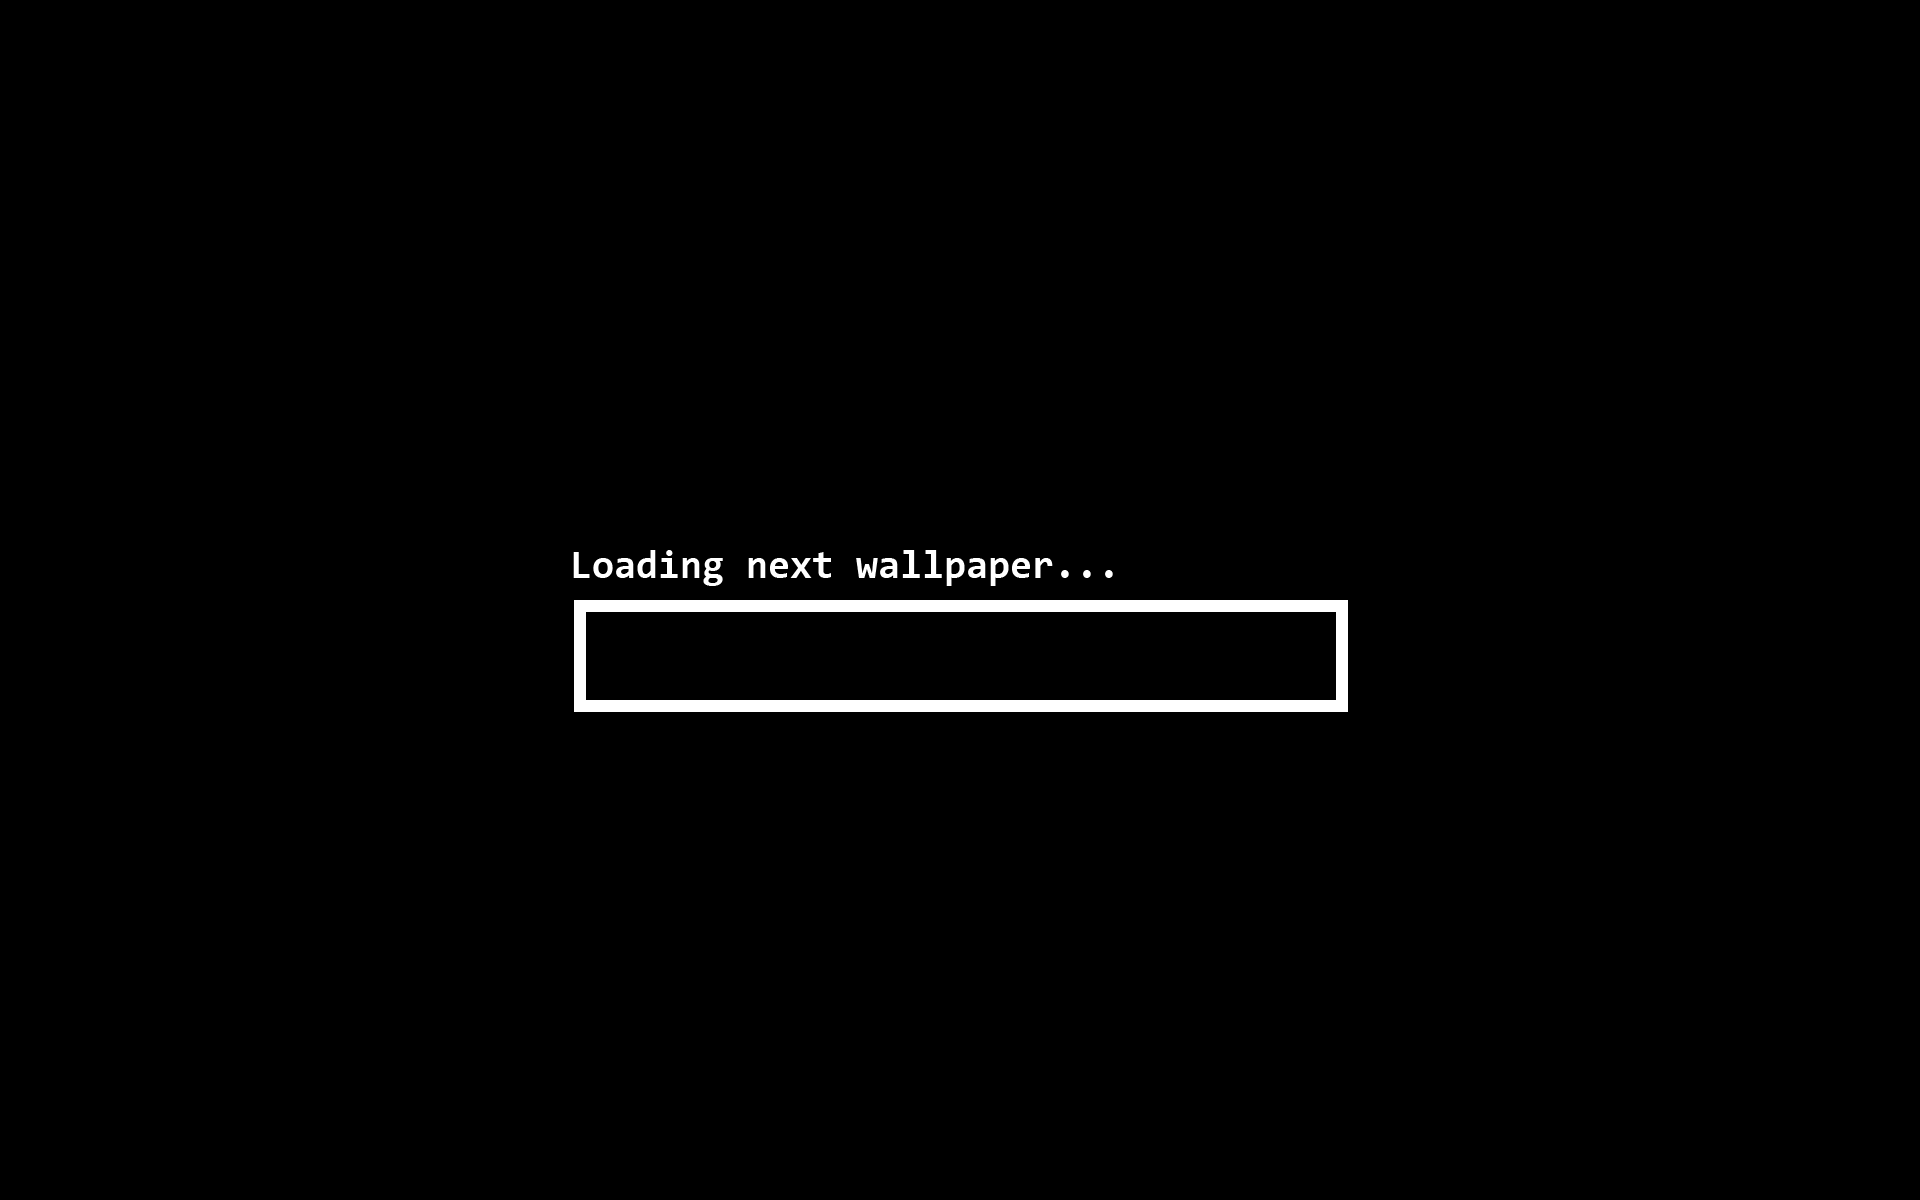 Loading Next Wallpapers Gif Animation